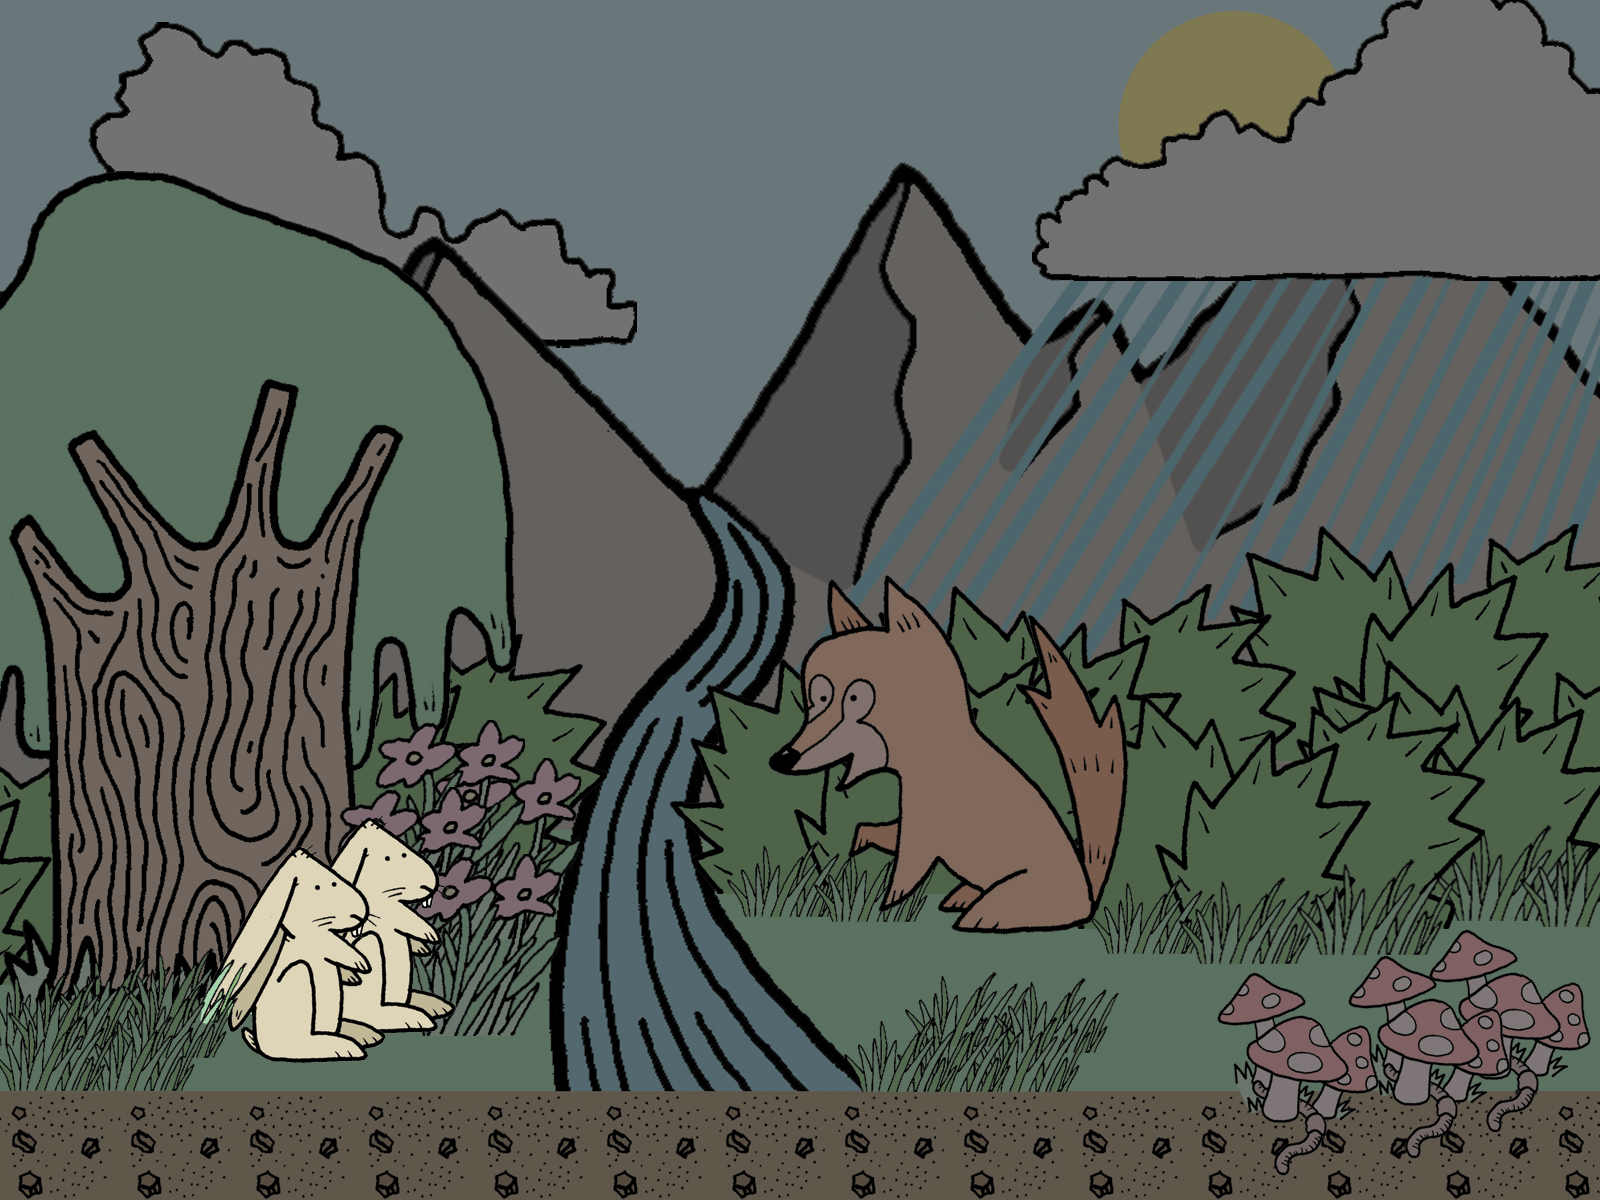 Cartoon representation of a forest with plants and animals, highlighting an analogy between herbivores (rabbits) and writing program pedagogical training.